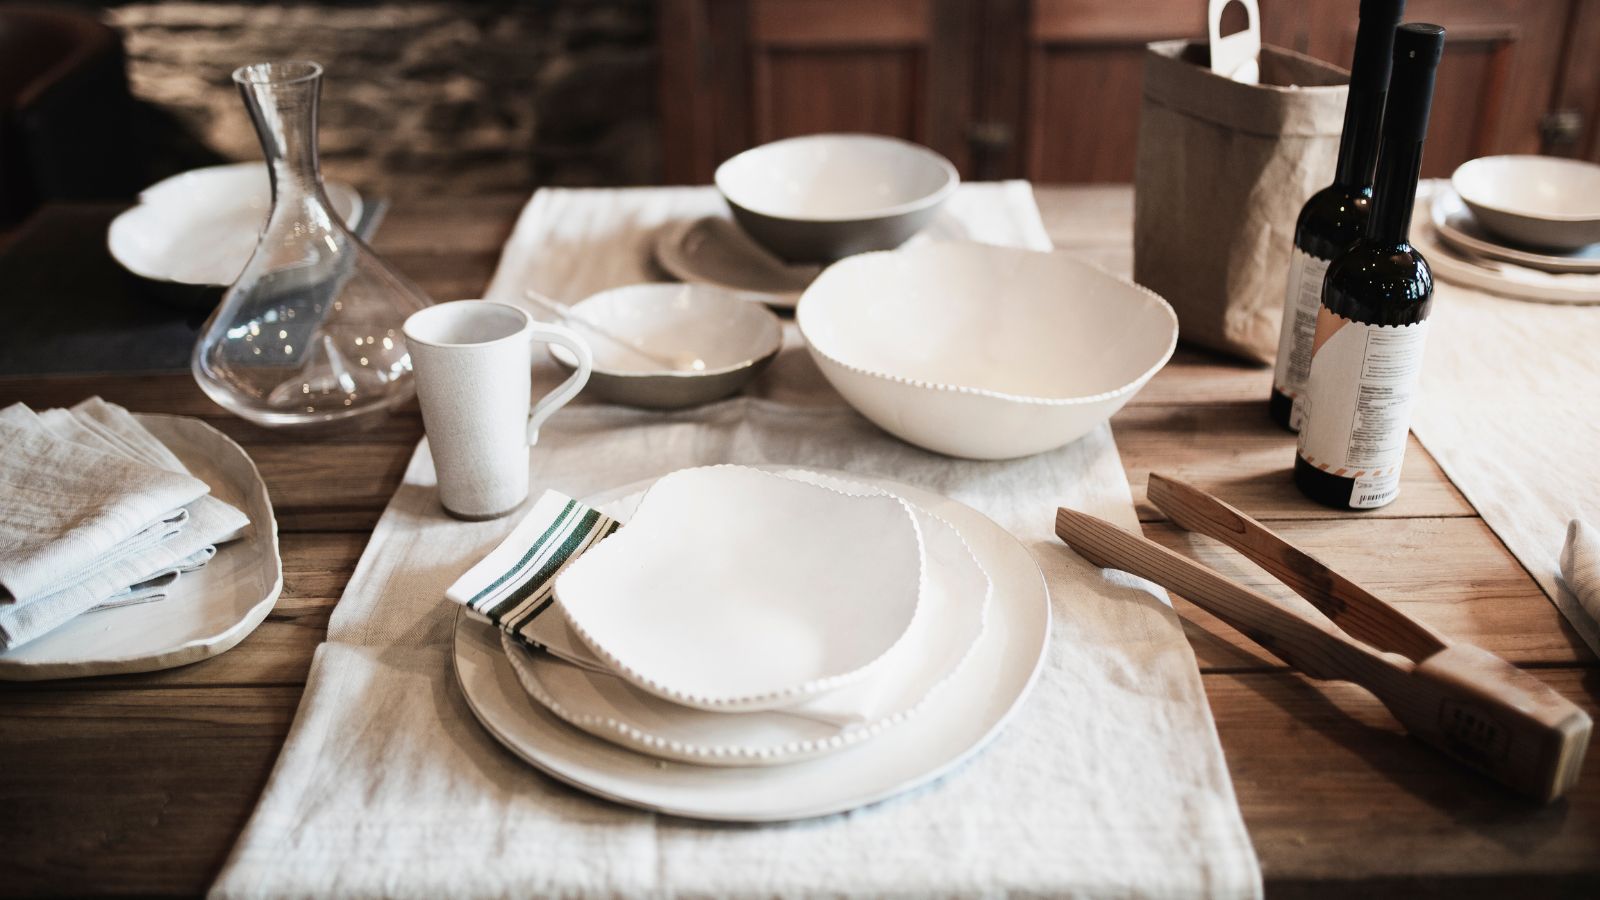 How to pick dinnerware to match any occasion